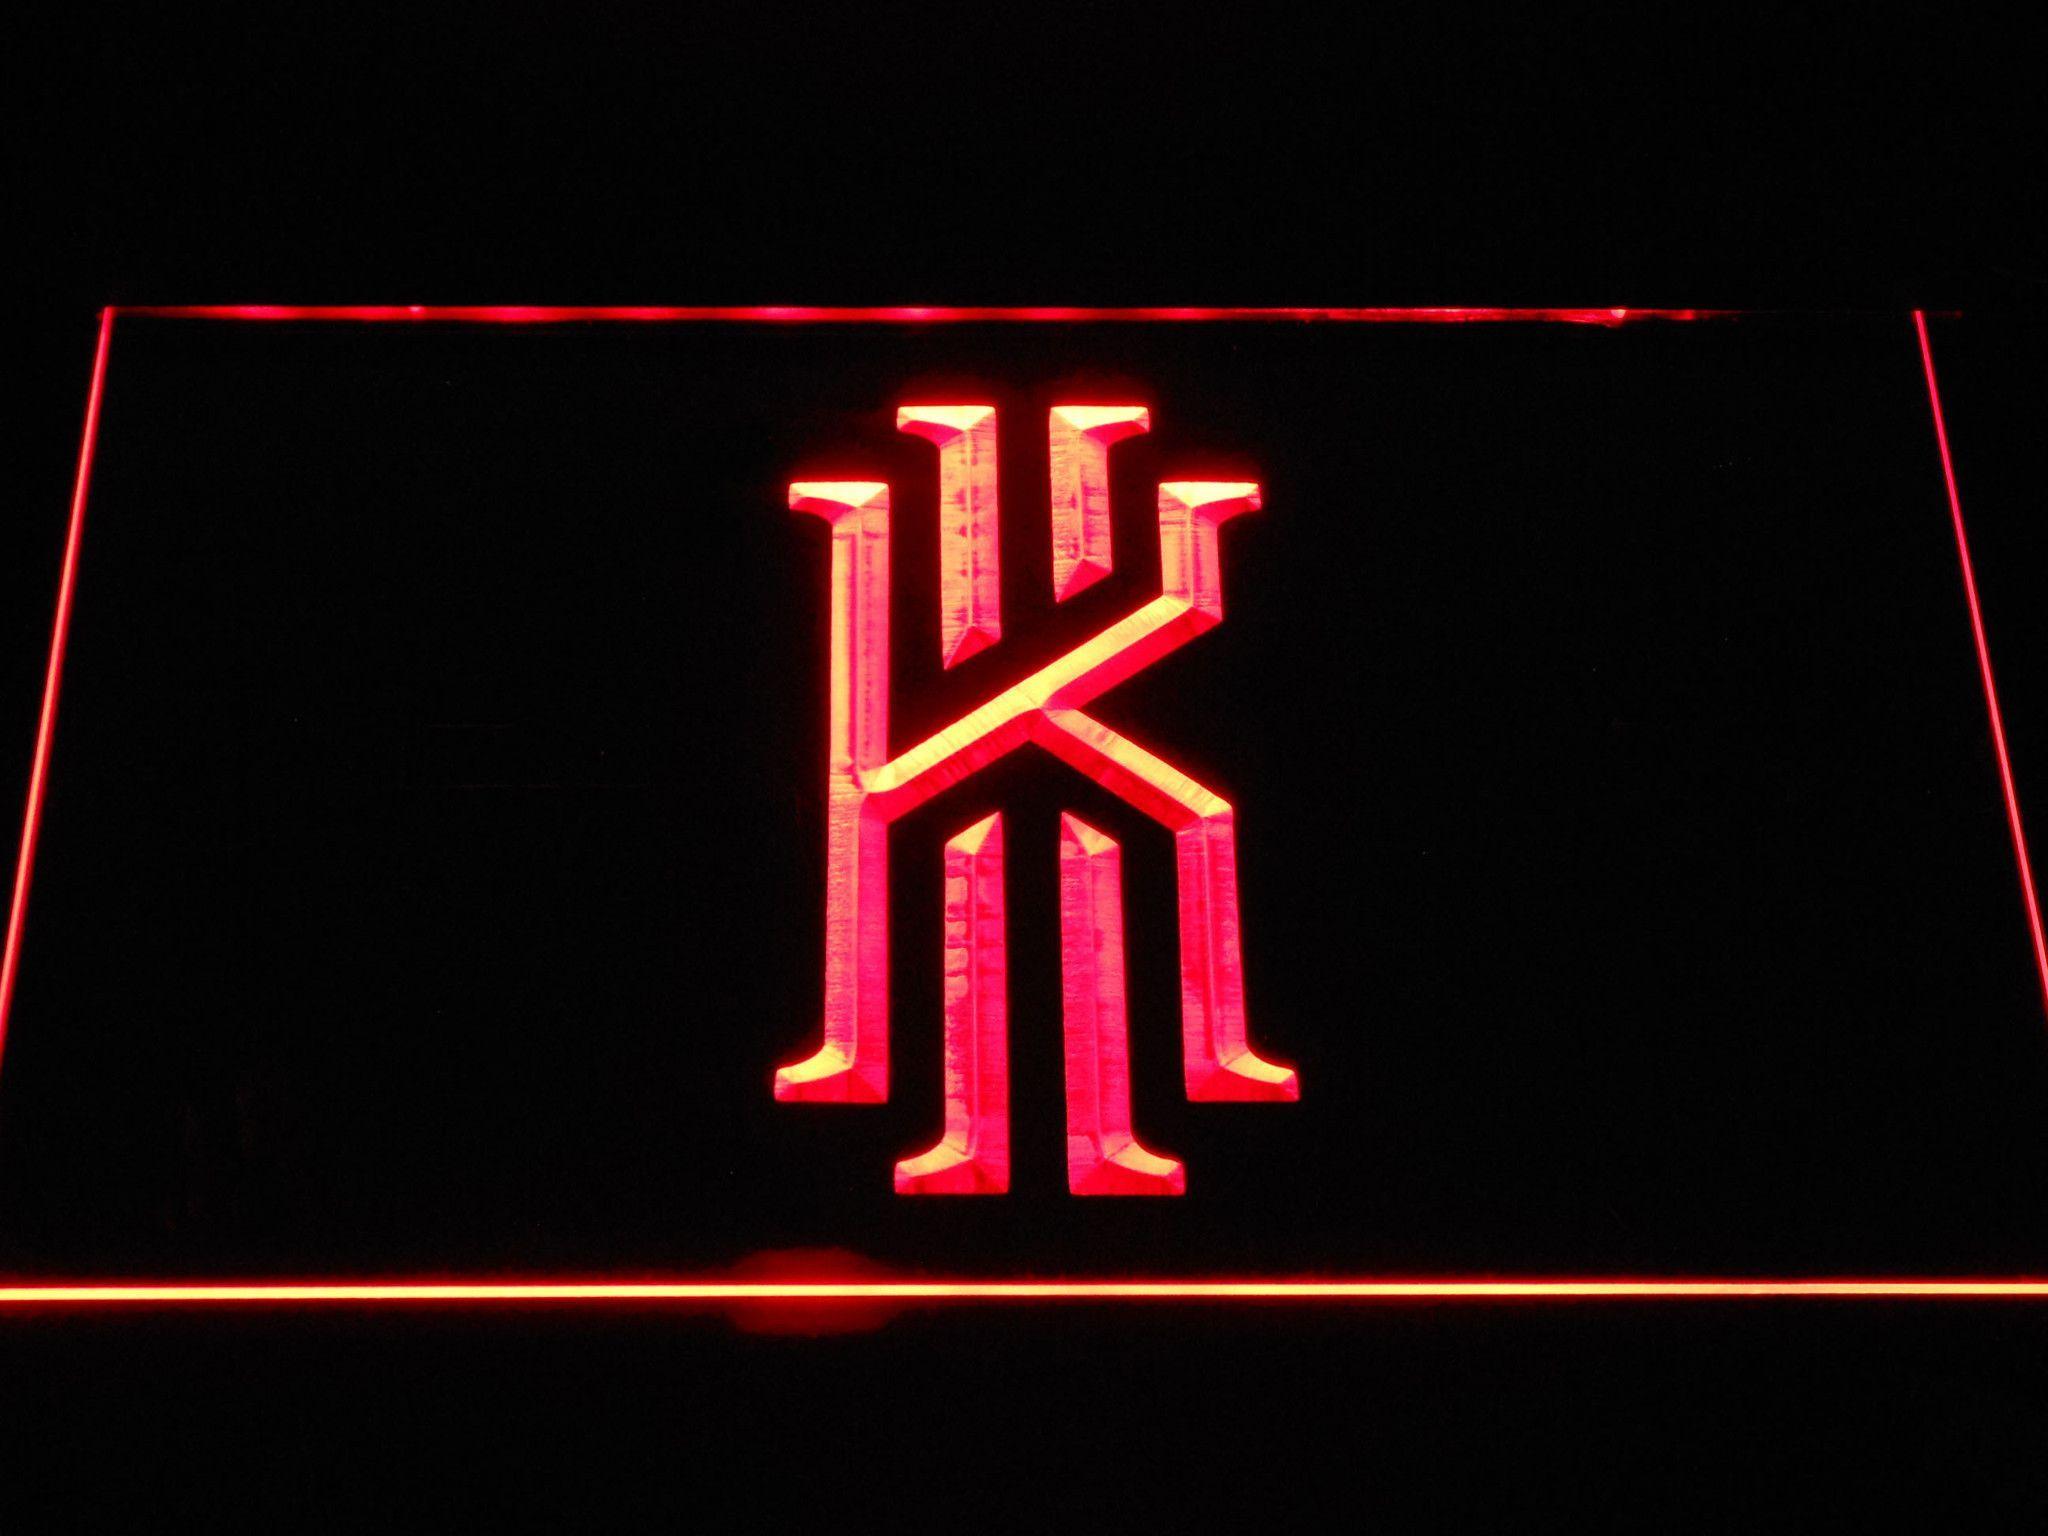 Cleveland Cavaliers Kyrie Irving Logo LED Neon Sign. Kyrie irving